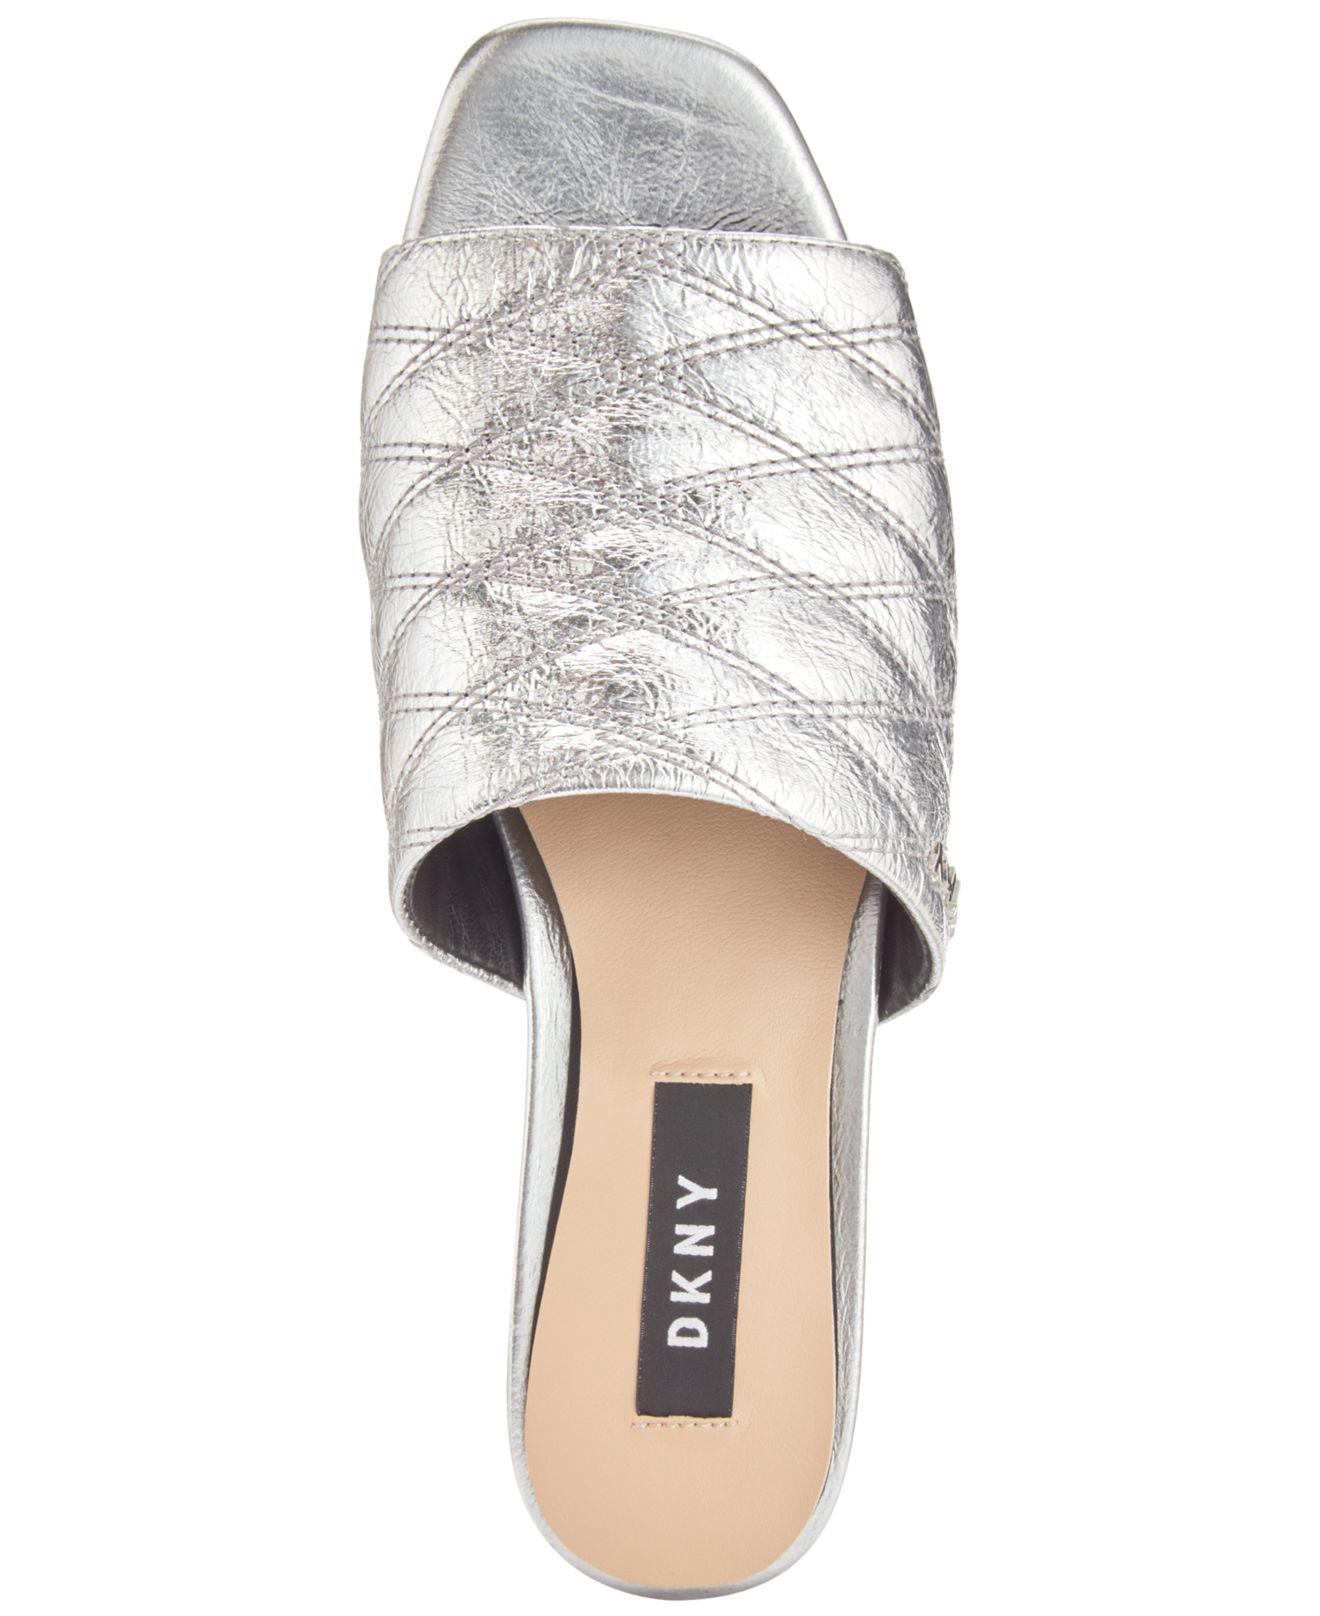 DKNY Leather Roy Flat Sandals in Silver (Metallic) - Lyst